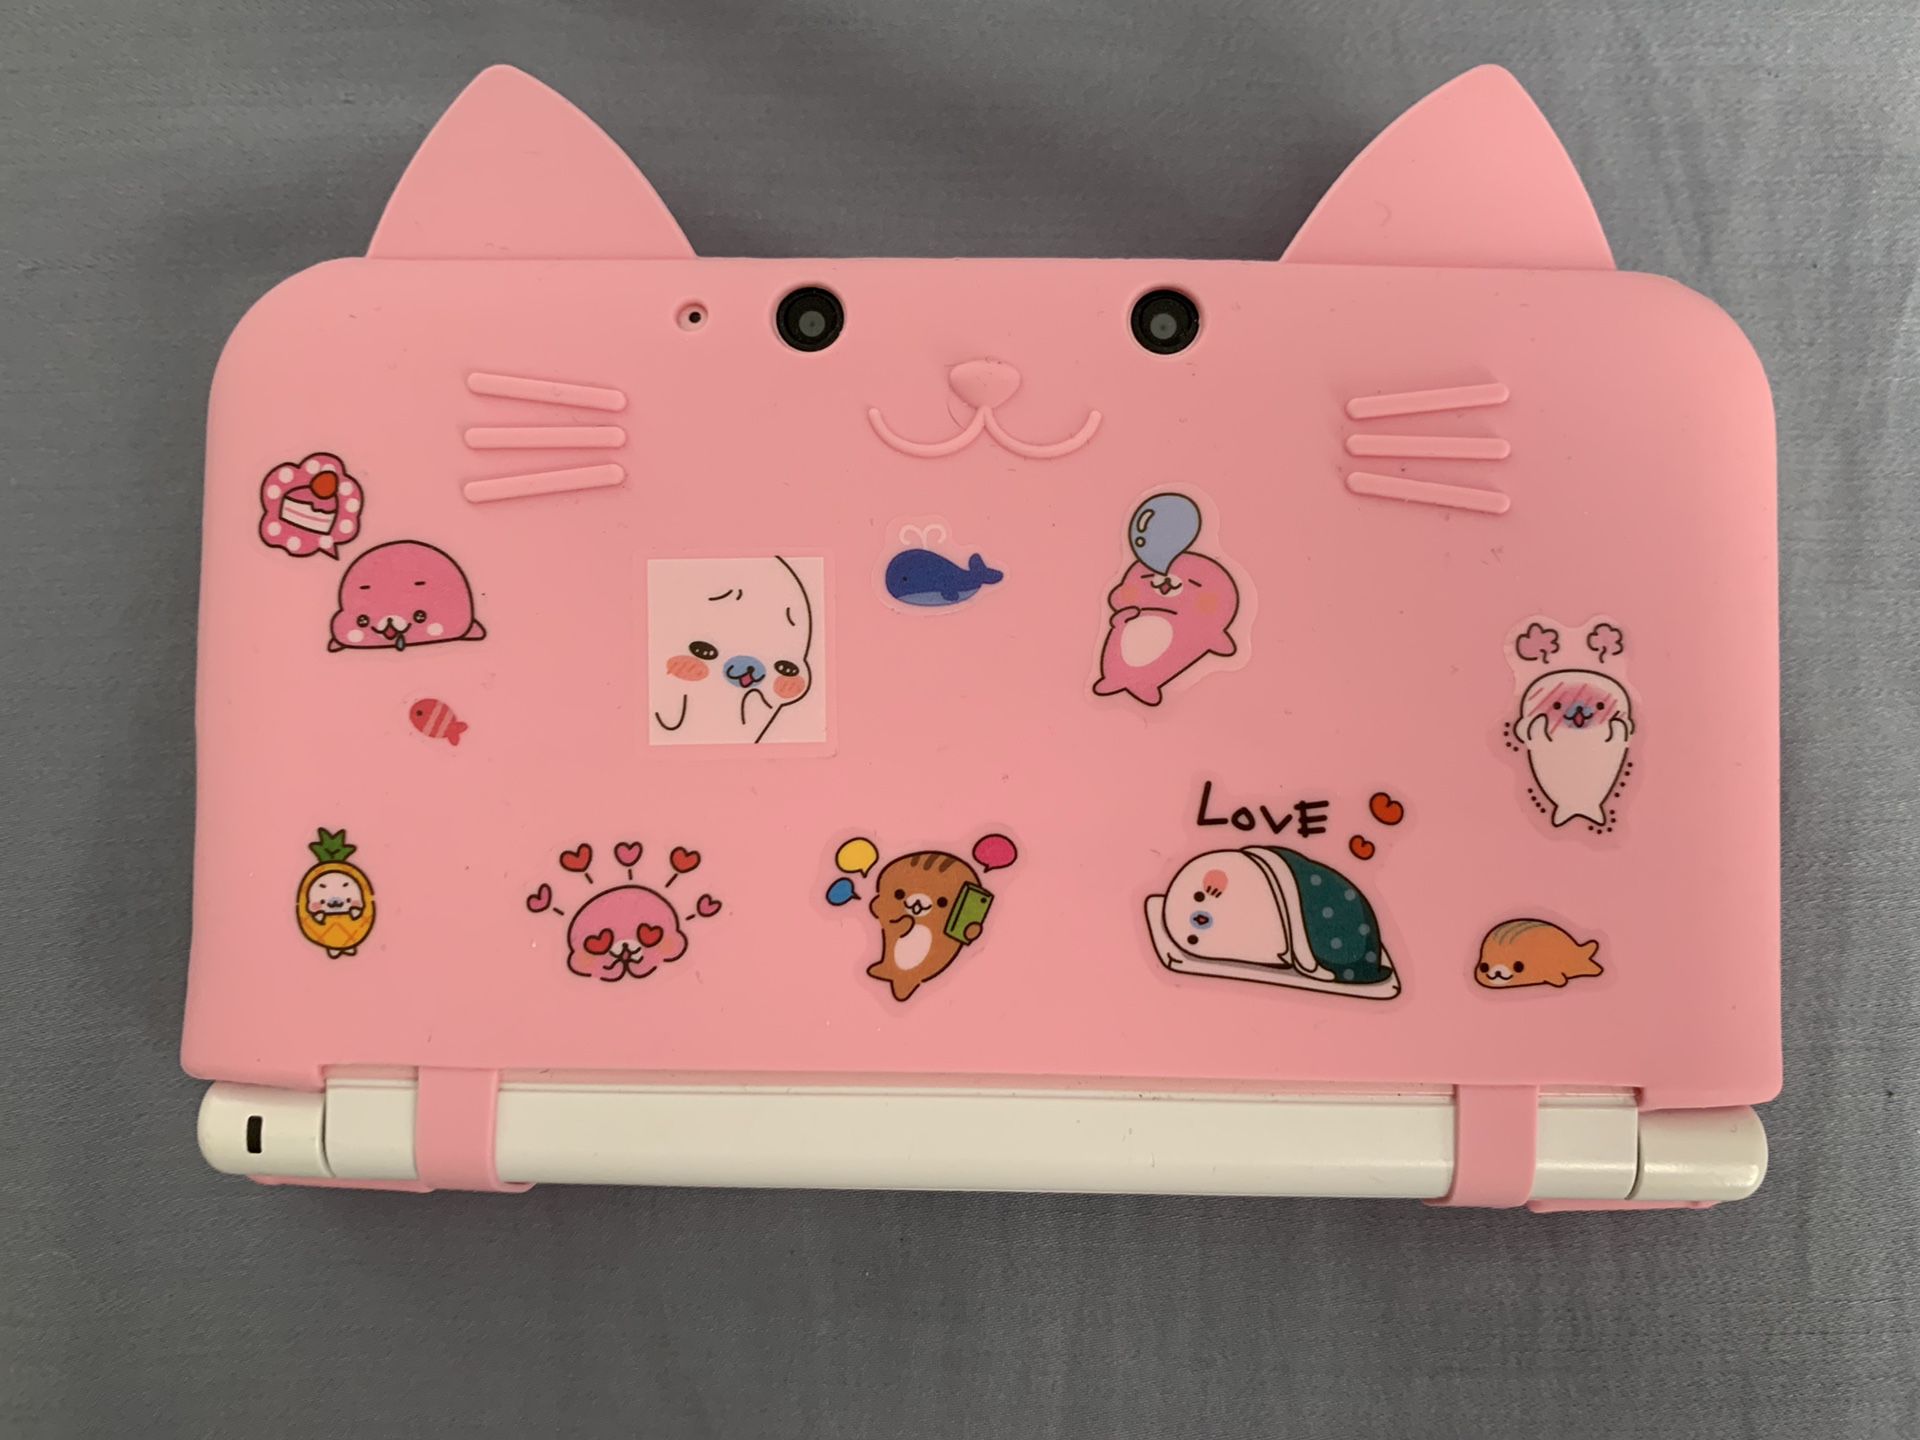 Rare Pink And White Nintendo 3DS